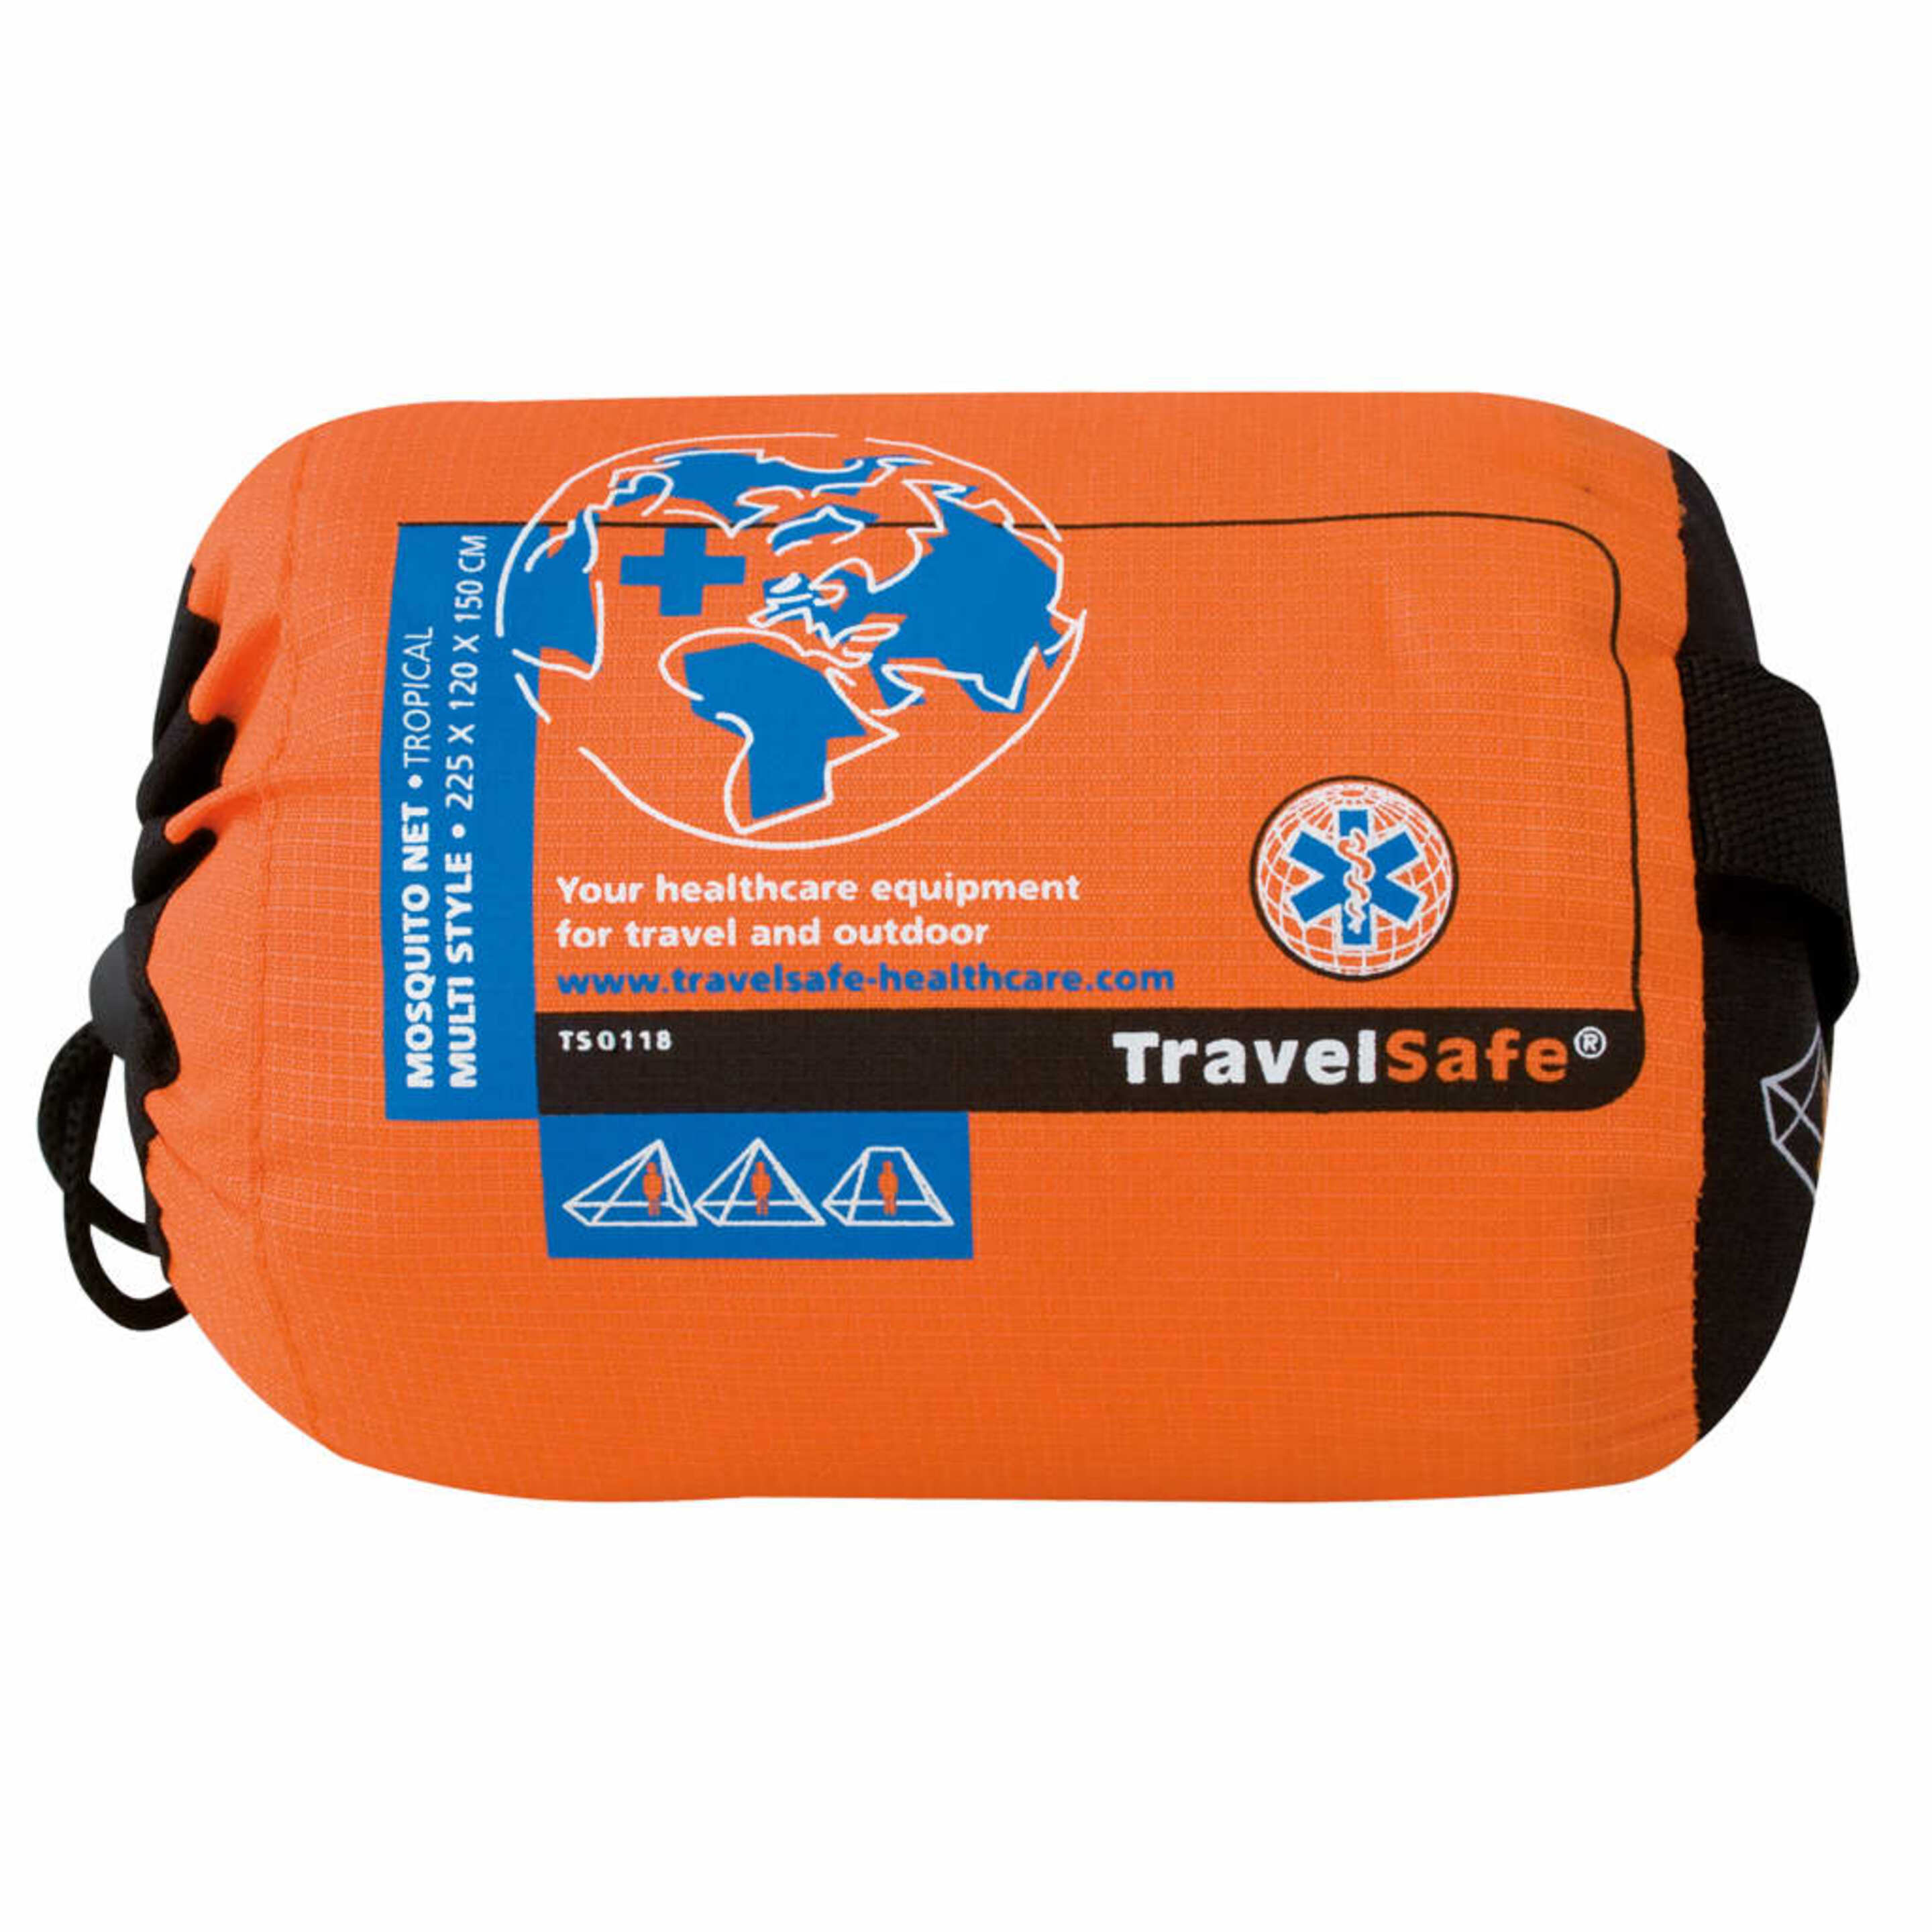 Travelsafe Mosquitera Tropical Muli Style 1 Persona